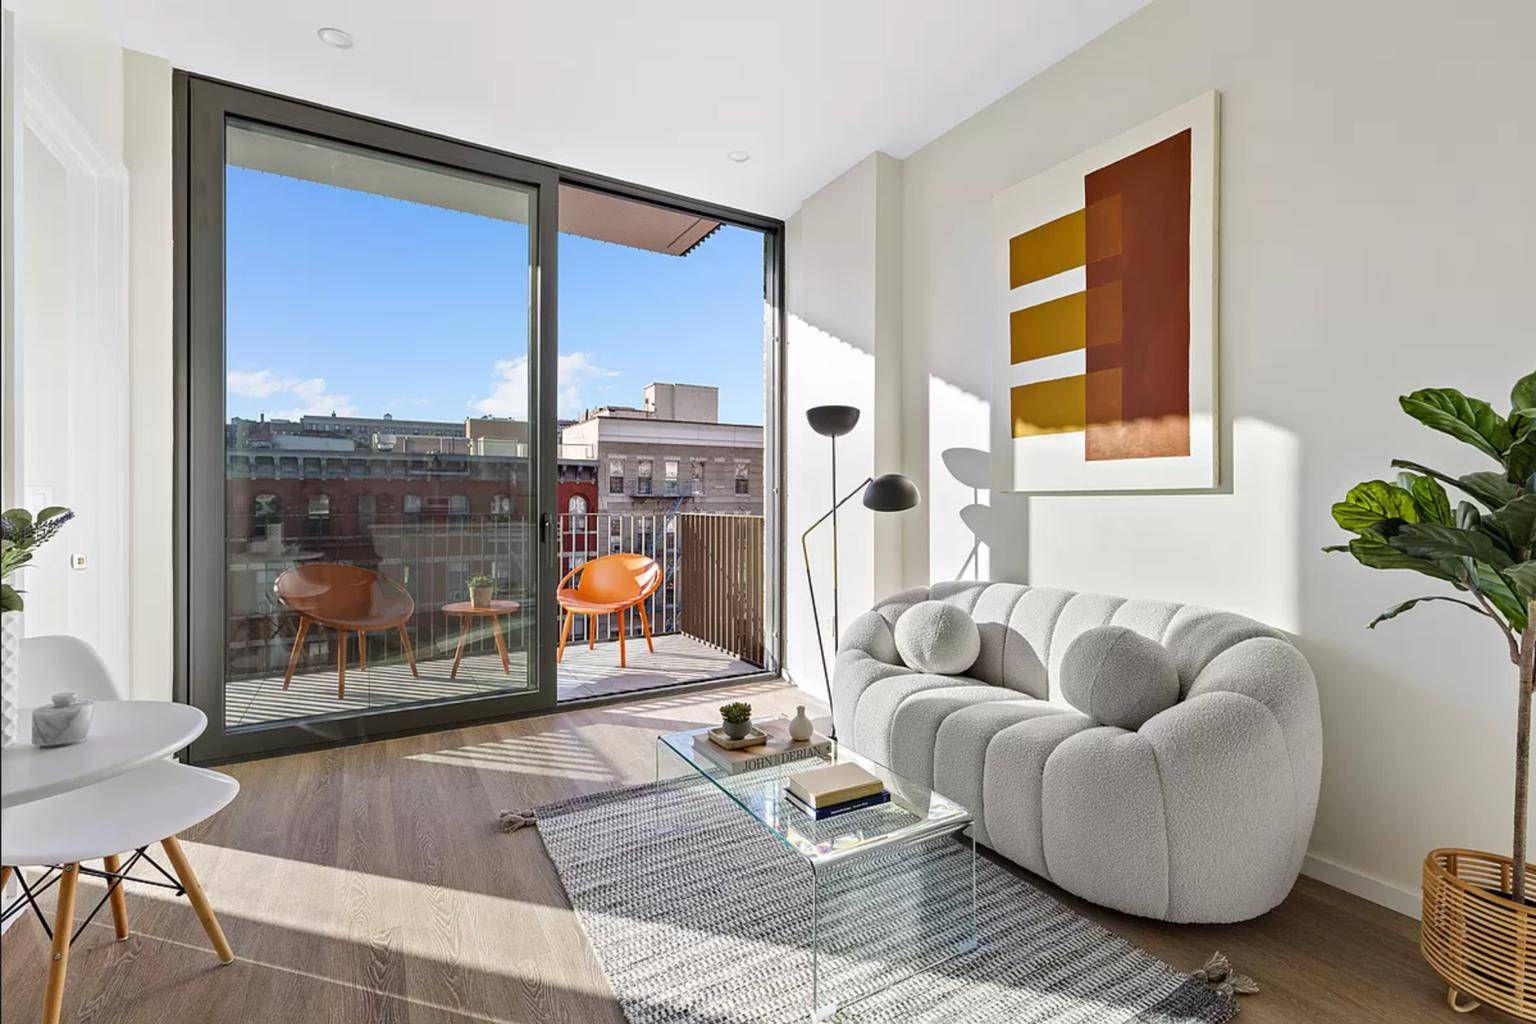 Park Row Brand New Luxury Penthouse Rental 2 Bed 1 Bath ResidenceEach unit offers immense natural light through oversized 8ft windows amp ; soaring 11ft ceilings !